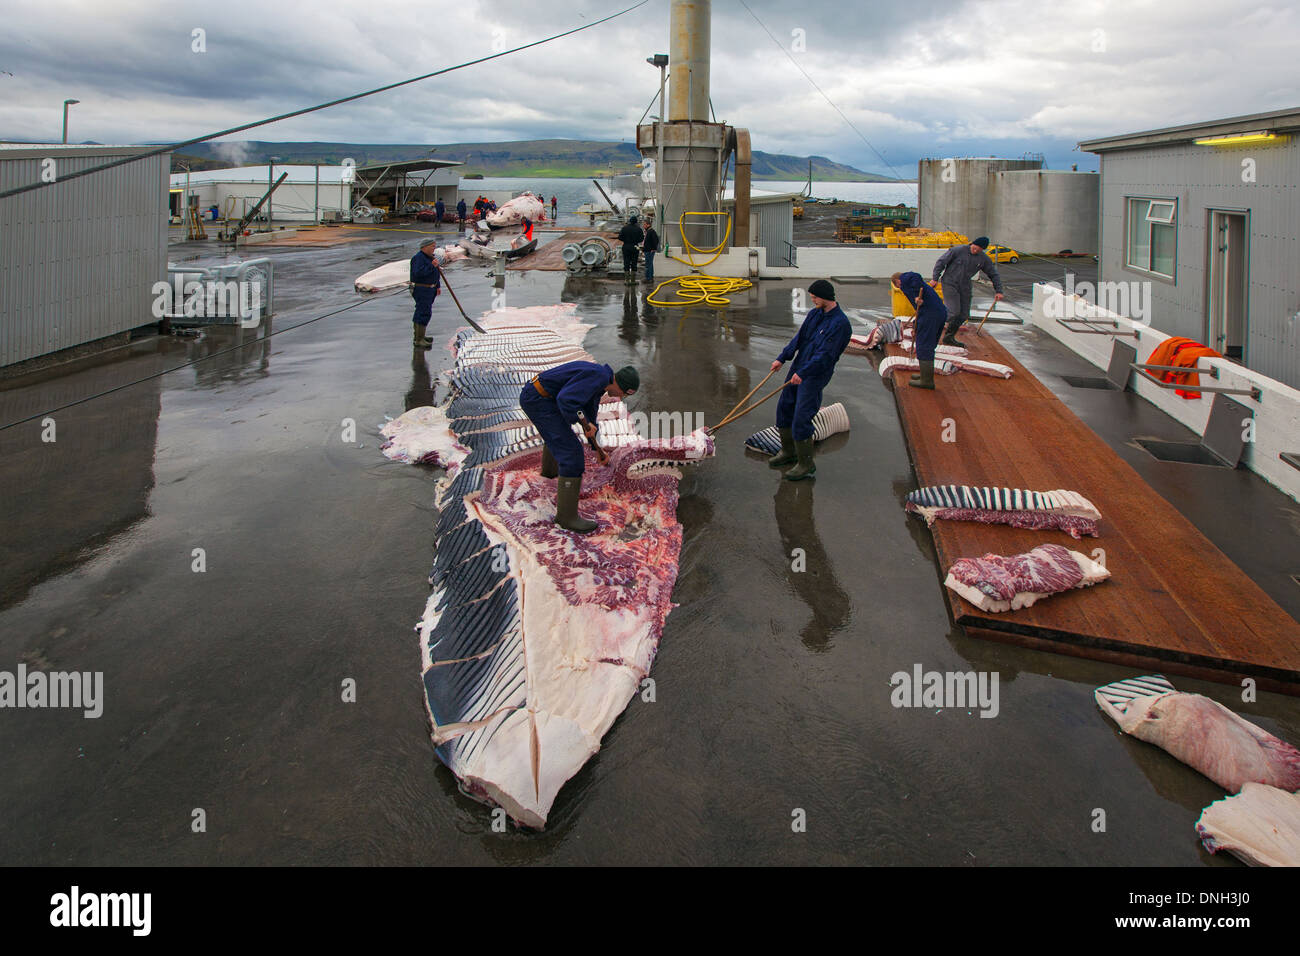 CUTTING UP OF FINBACK WHALES AT THE SEASIDE RESORT OF HVALFJORDUR, THE FJORD OF WHALES, WHALE HUNTING IN ICELAND, WESTERN ICELAND, EUROPE Stock Photo